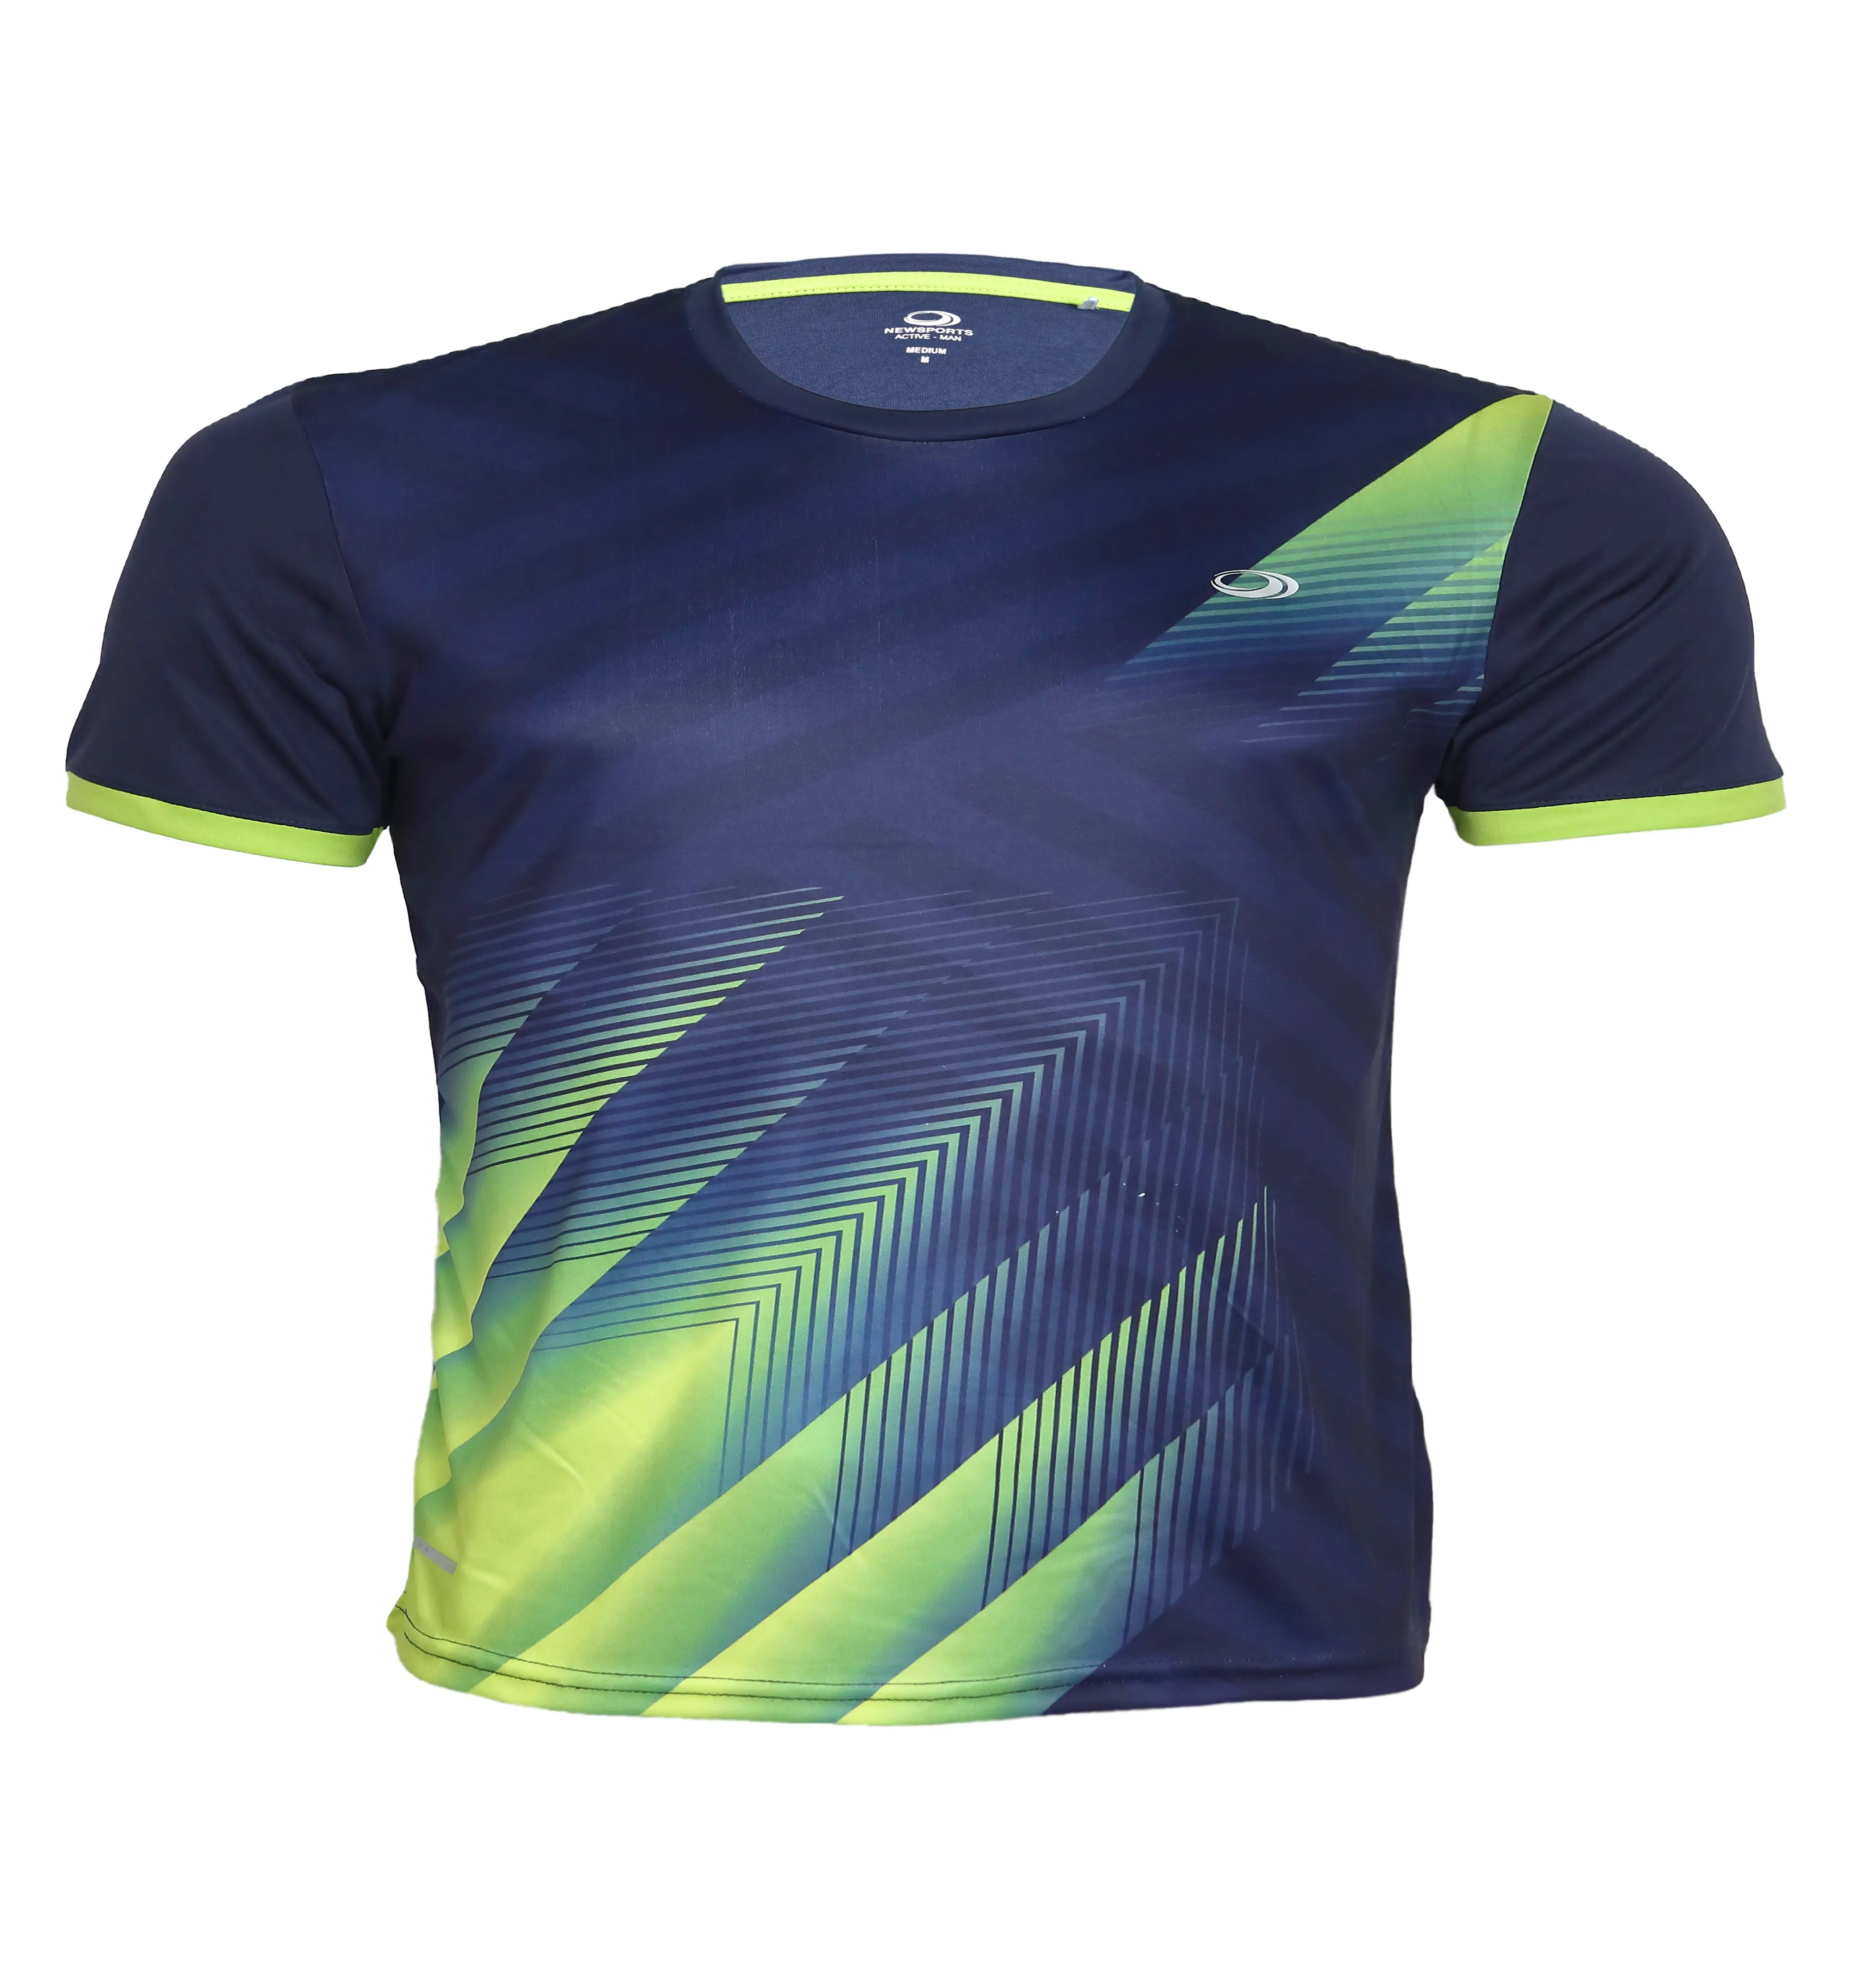 100% Polyester single jersey 140 grams short sleeve o neck high quality sublimation printed men t shirt